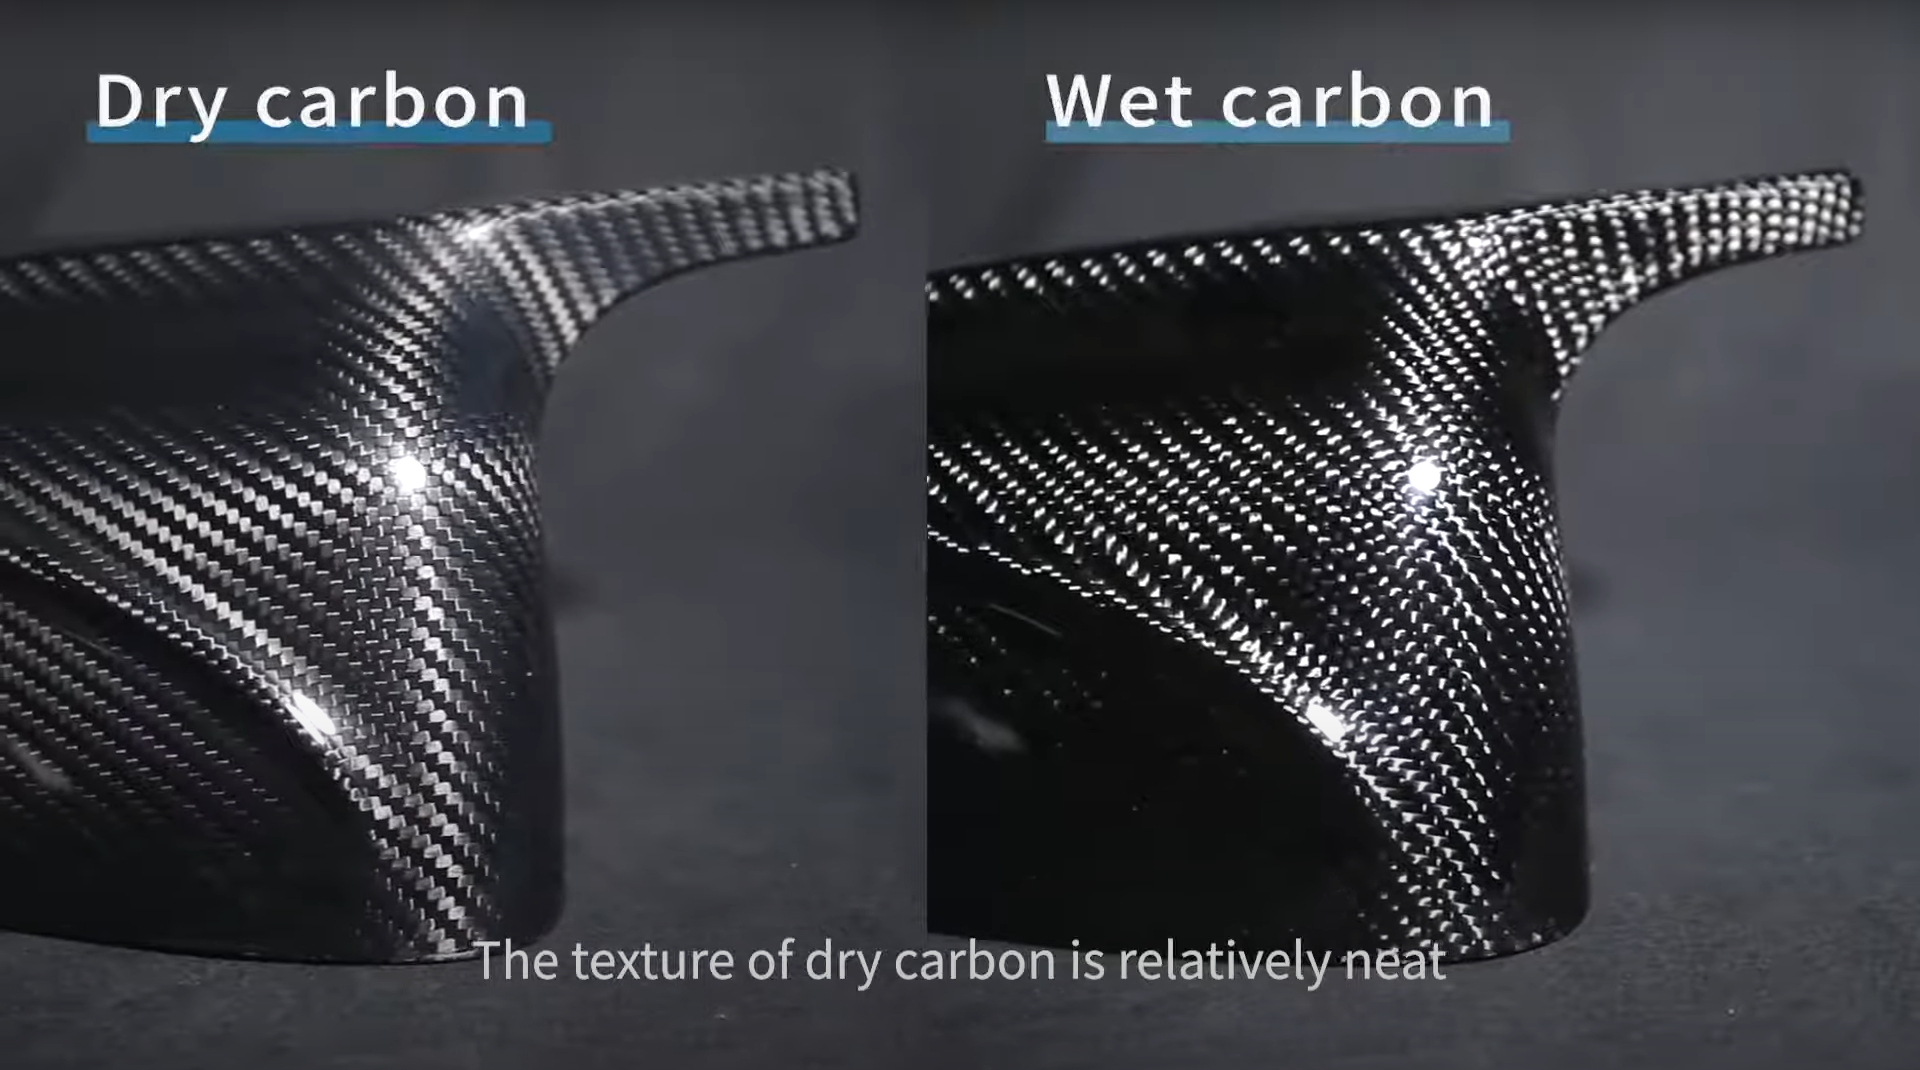 Dry carbon has a neater, more uniform and tridimentional texture. Photo source: What's Different Between Dry Carbon and Wet Carbon Mirror Caps?